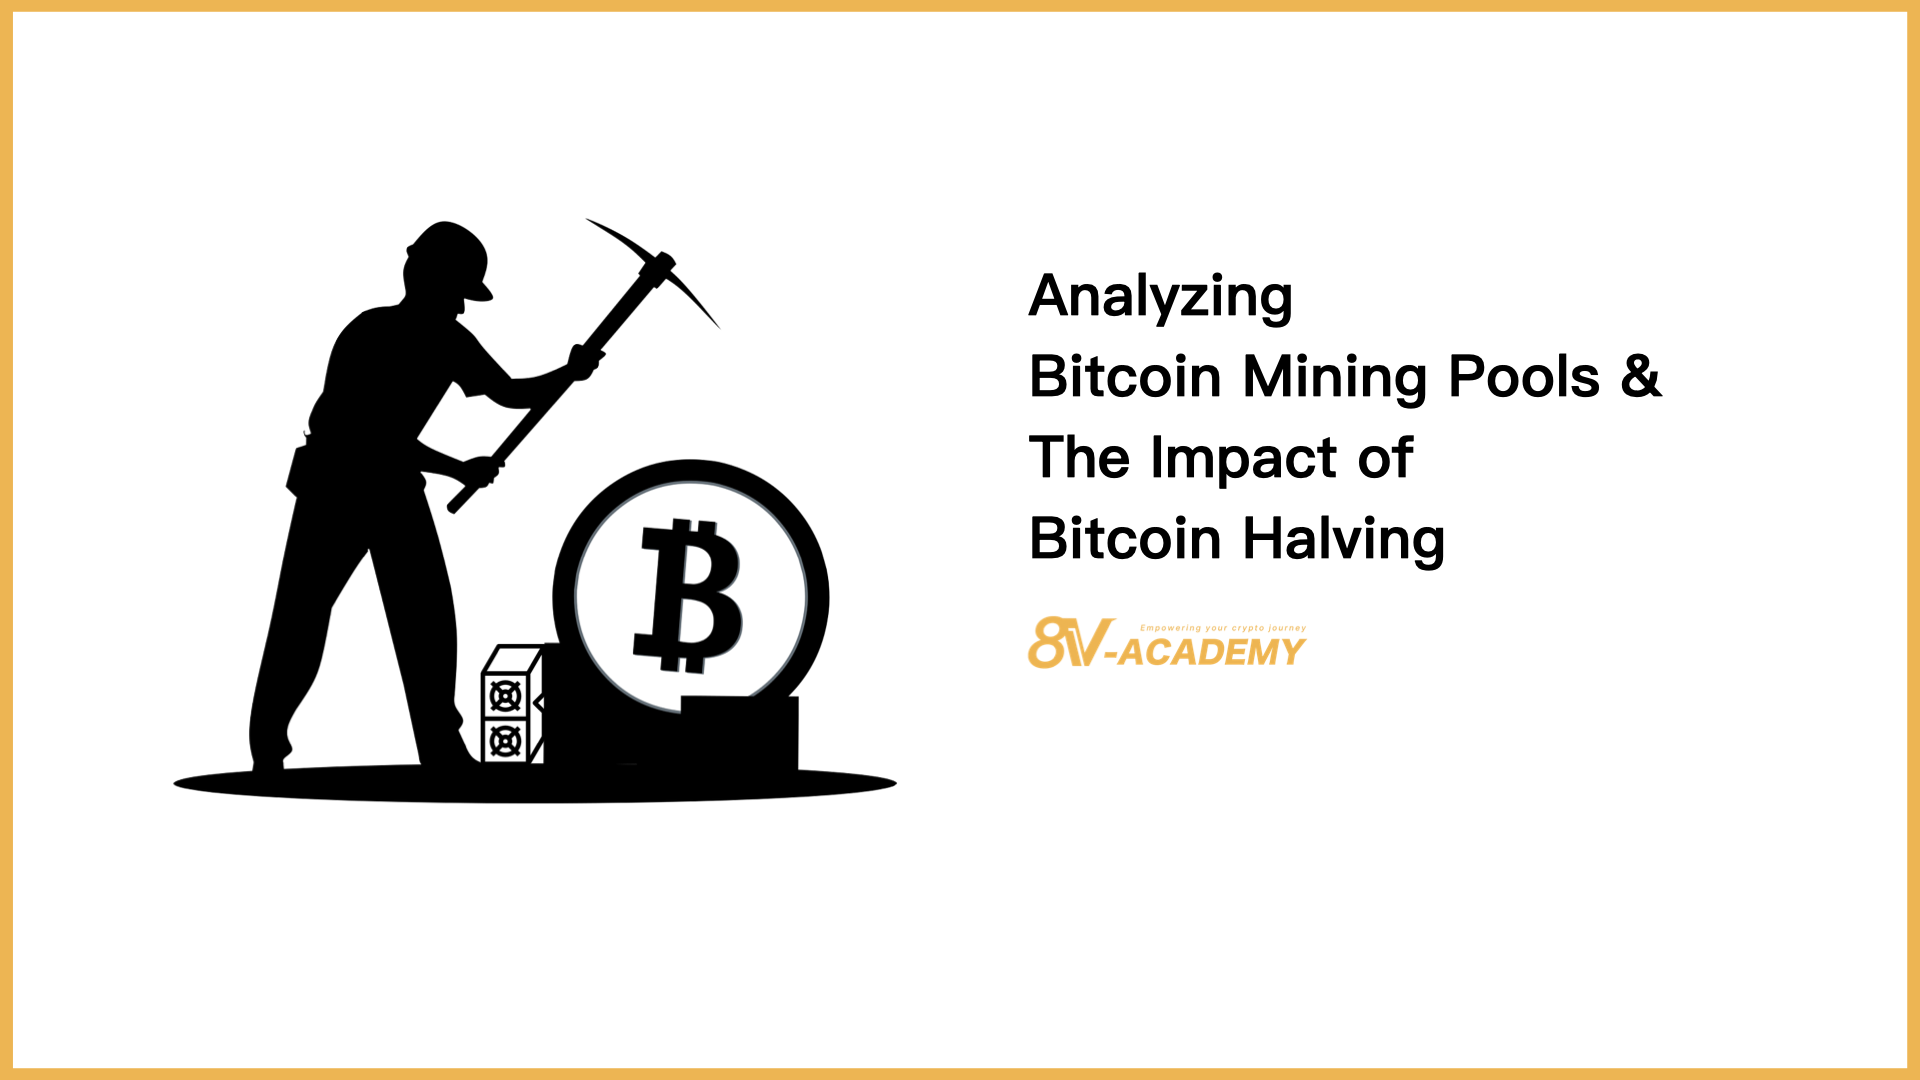 Analyzing Bitcoin Mining Pools and the Impact of Bitcoin Halving